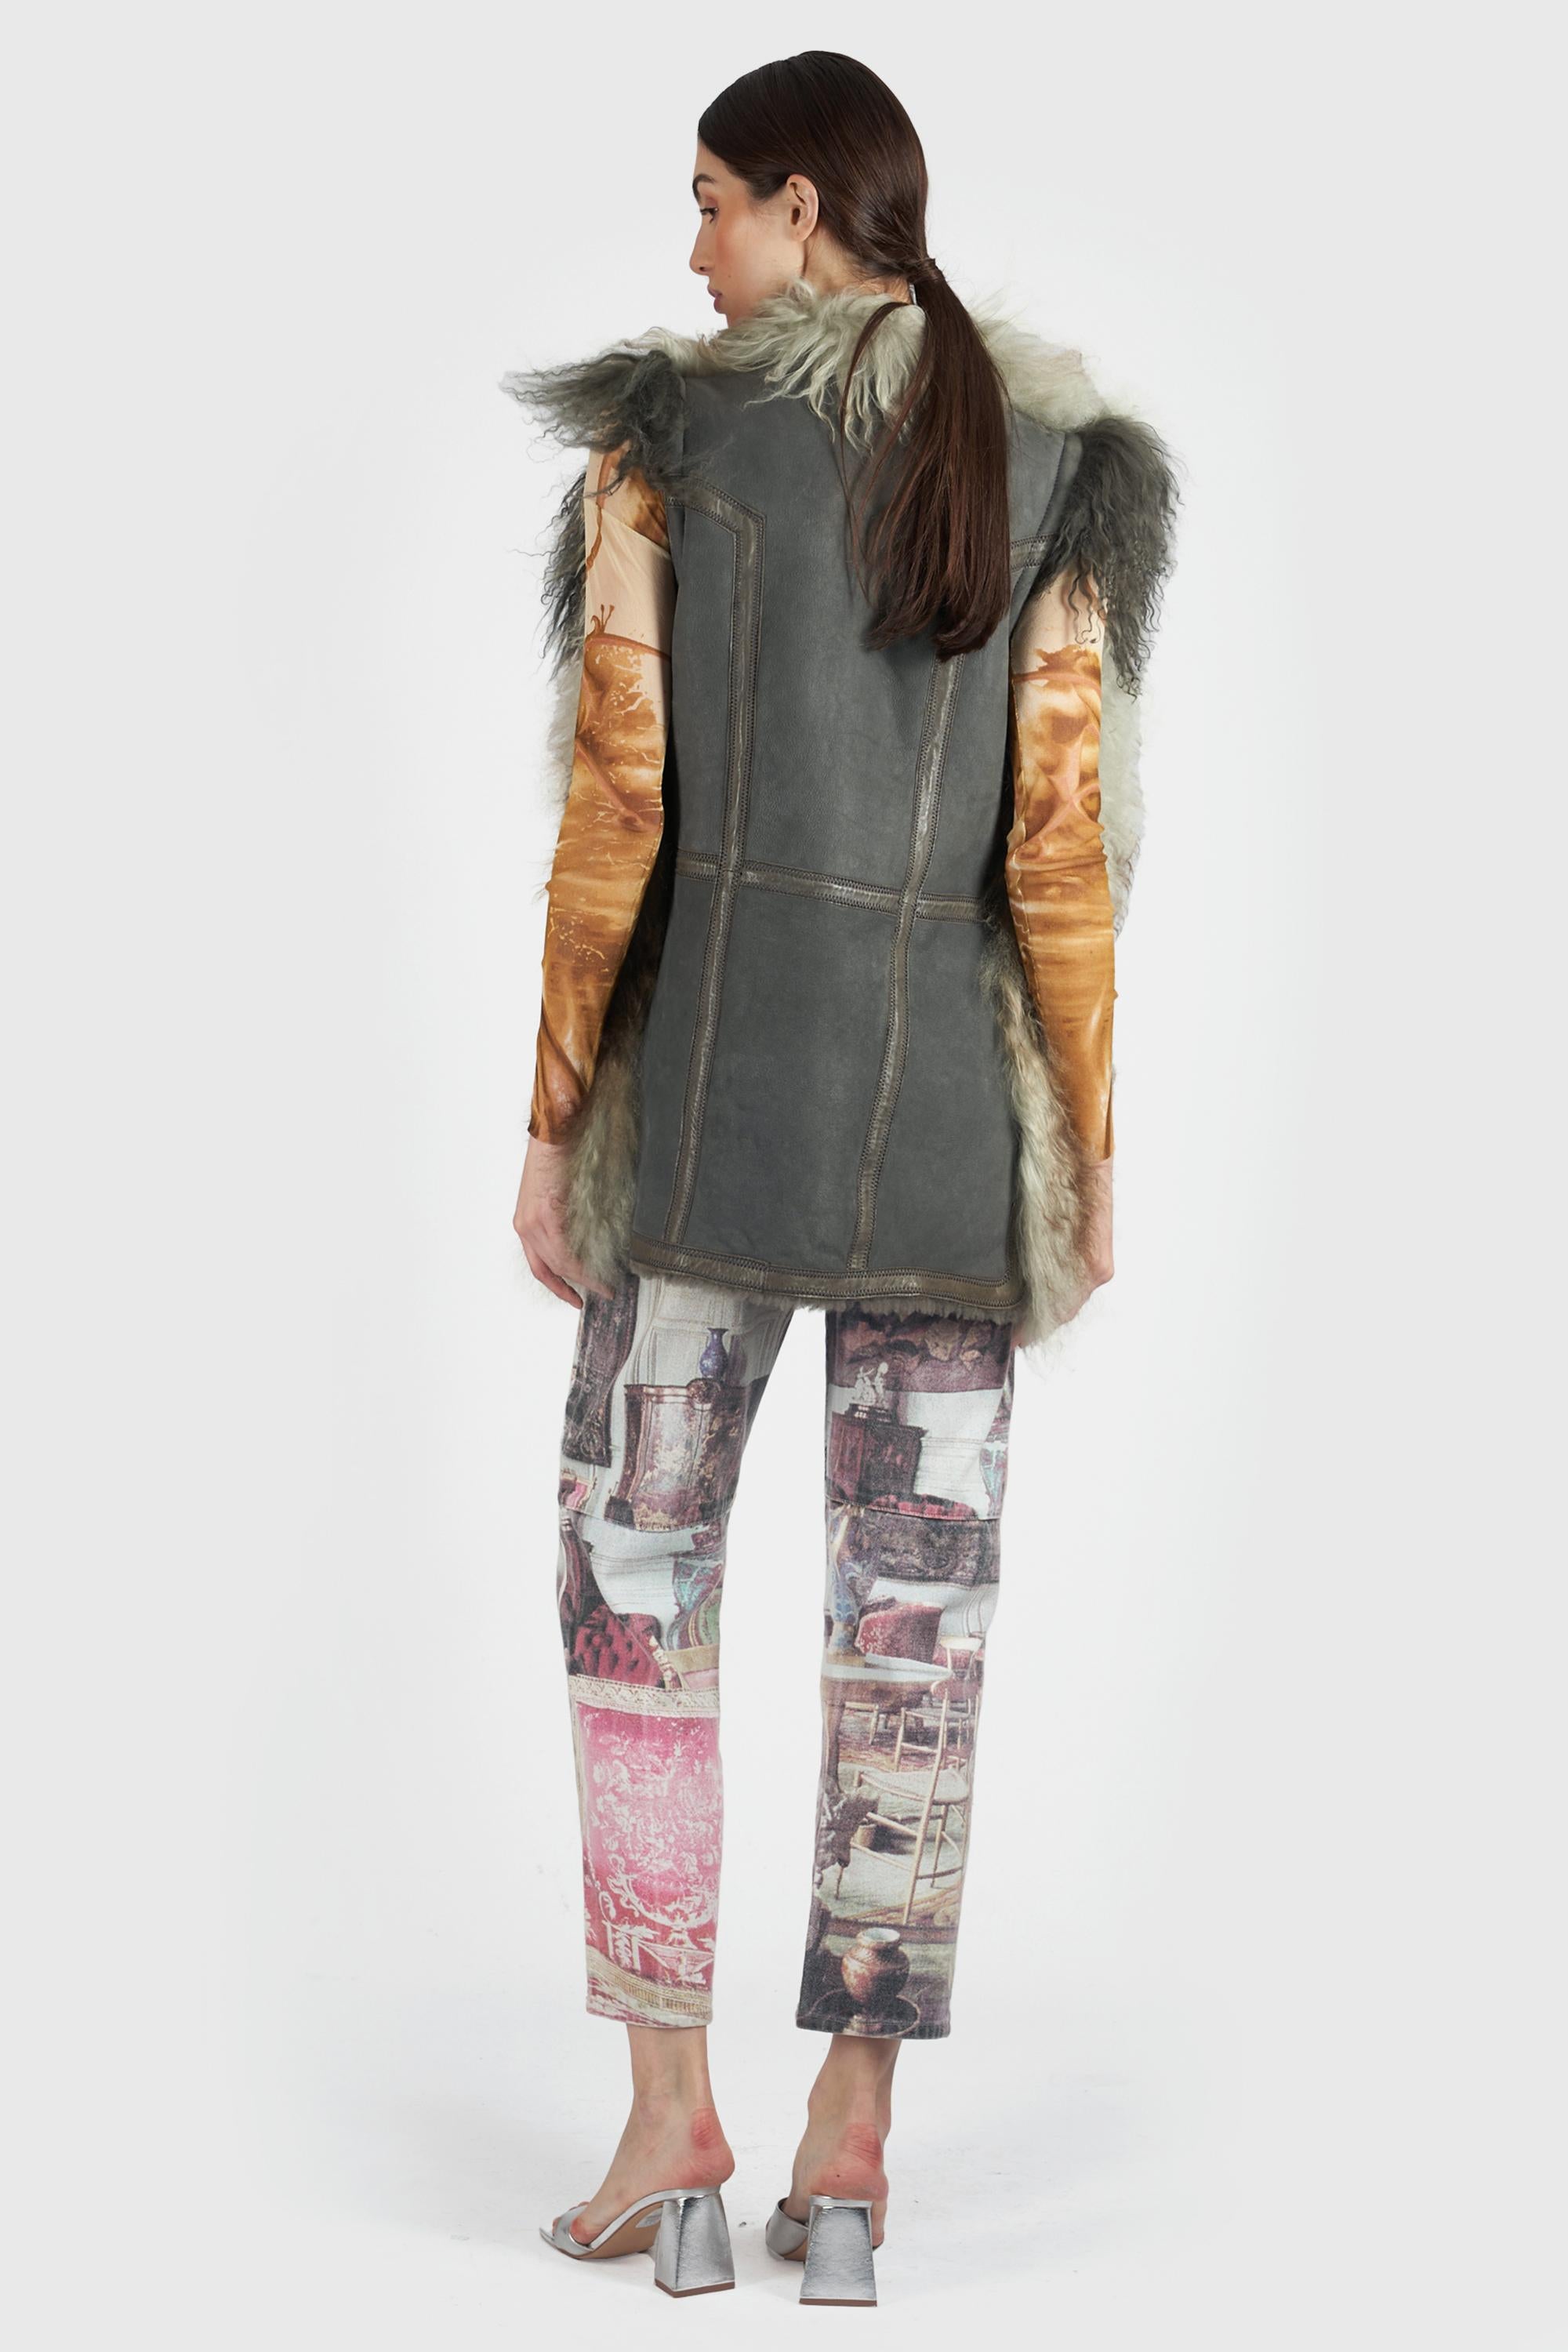 We are excited to present Just Cavalli F/W 2012 gilet. Features lamb fleece lining. In excellent vintage condition.

Label size: 42 IT
Modern size: UK: 8 to 10, US: 4 to 6, EU: 38 to 40
Fabric: Lamb fur, Goat leather, Viscose
Measurements when laid